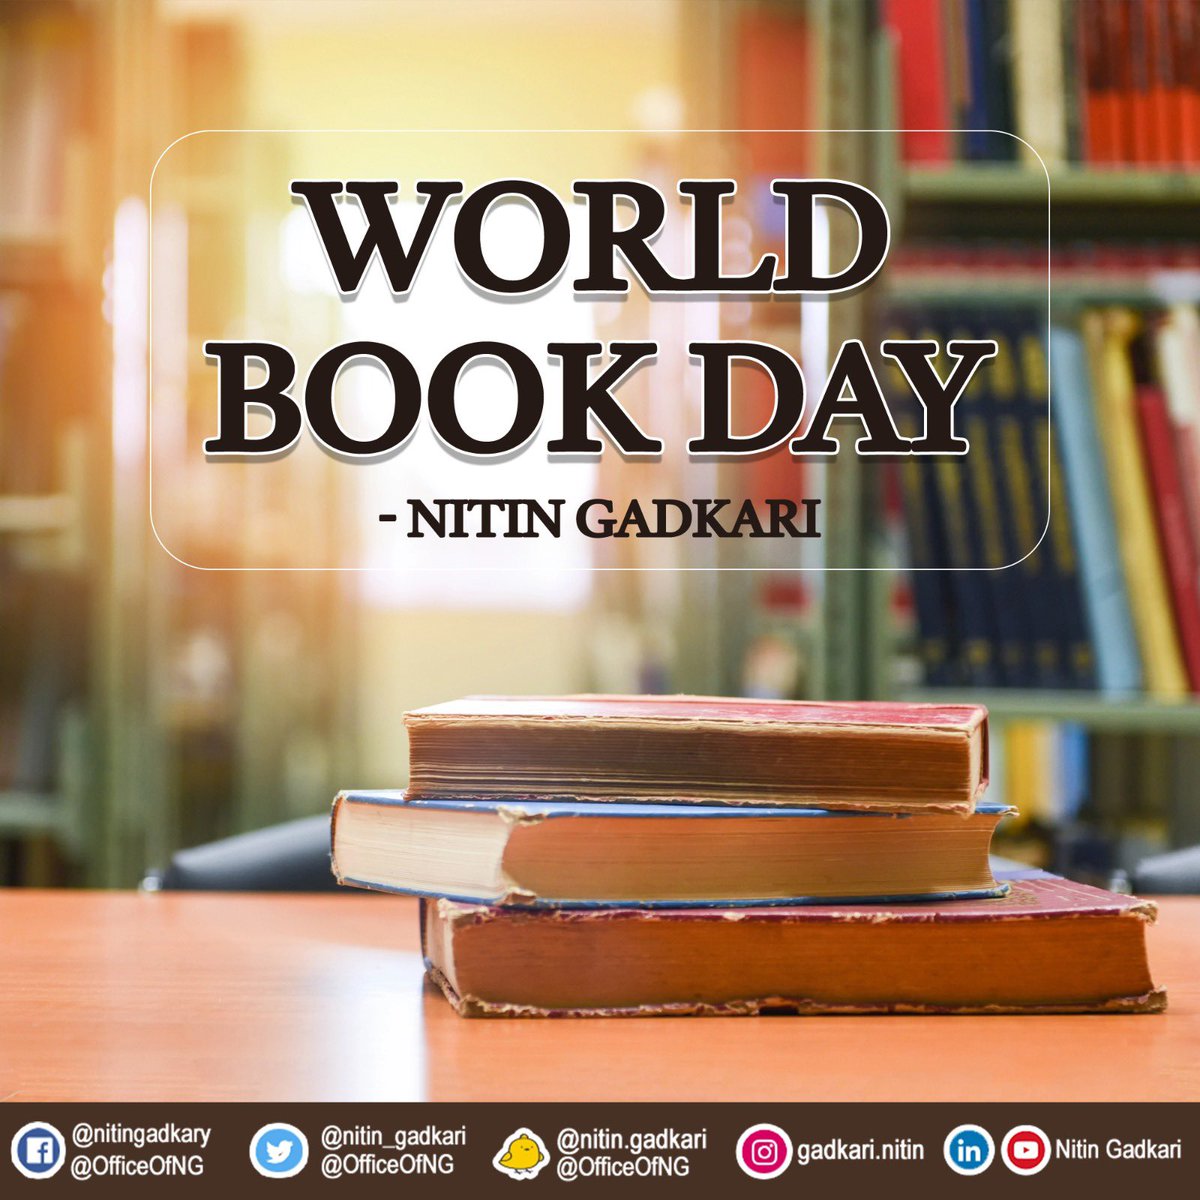 Happy #WorldBookDay to the connoisseurs of literature. May the literary luminaries of yore and present continue to inspire and enrich our lives with their profound wisdom and esoteric knowledge. Let the written word be a beacon of enlightenment and empower us.